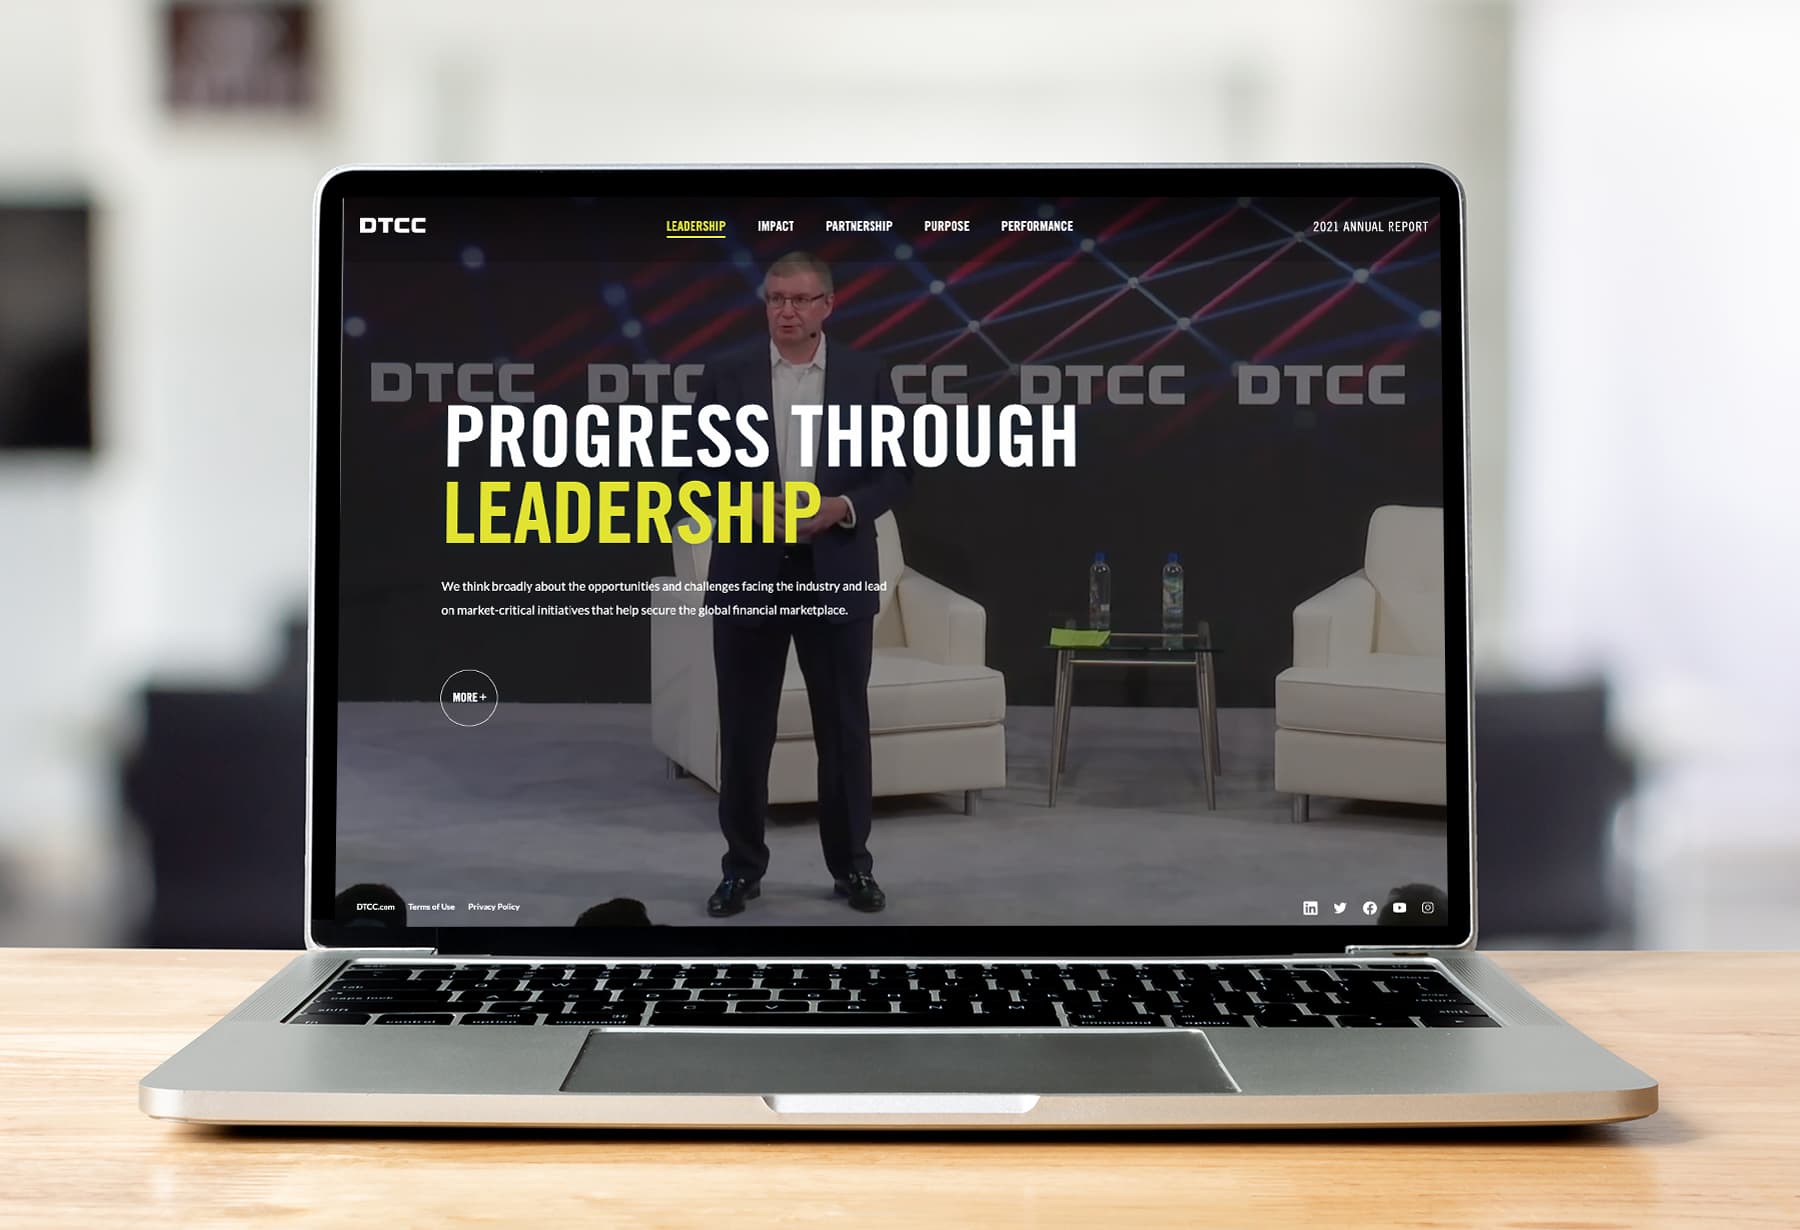 Home page of the DTCC Annual Report displayed on a laptop screen